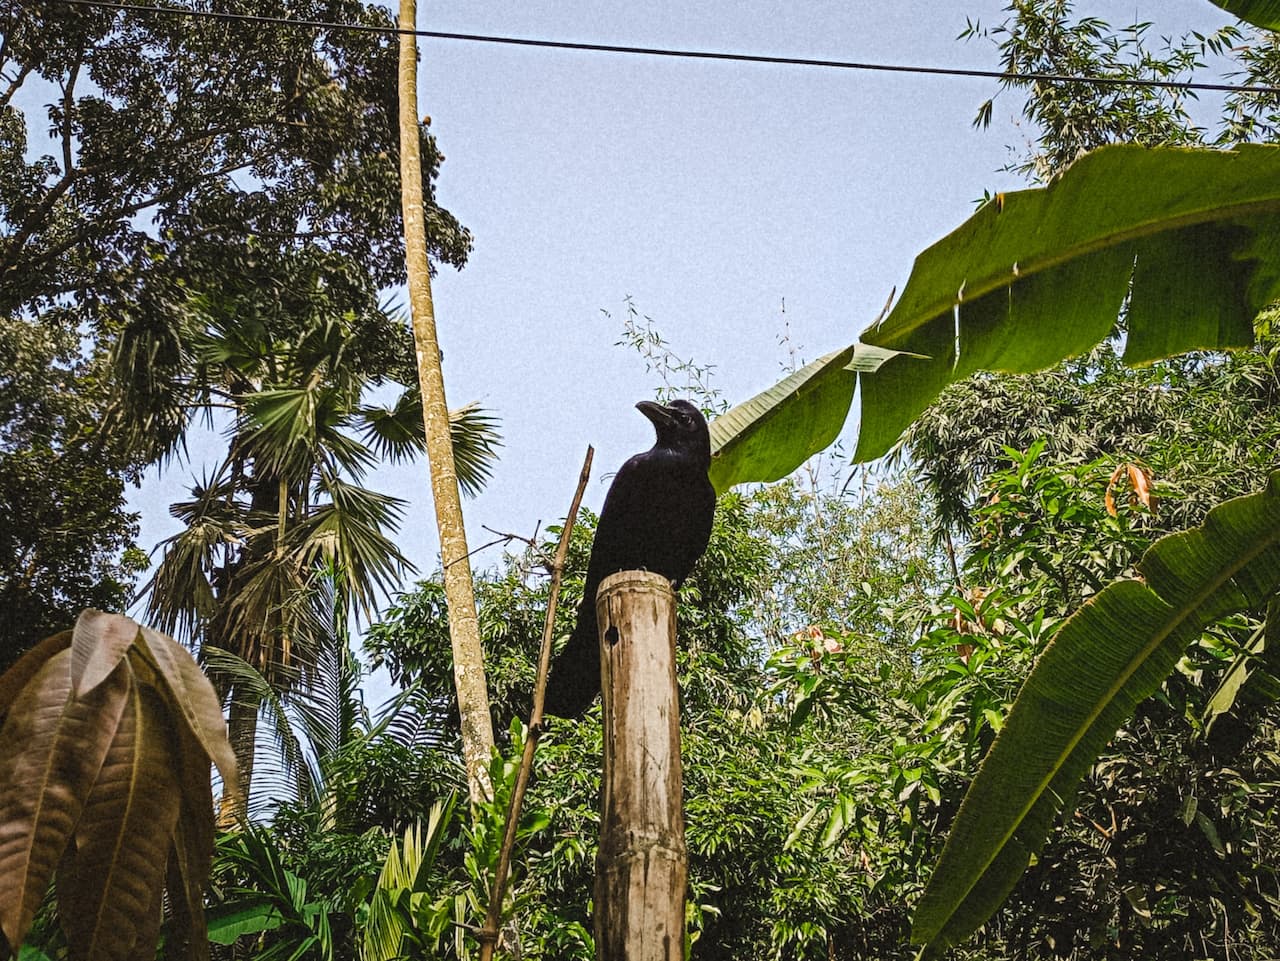 A Jungle Crow sitting in the top of a log.